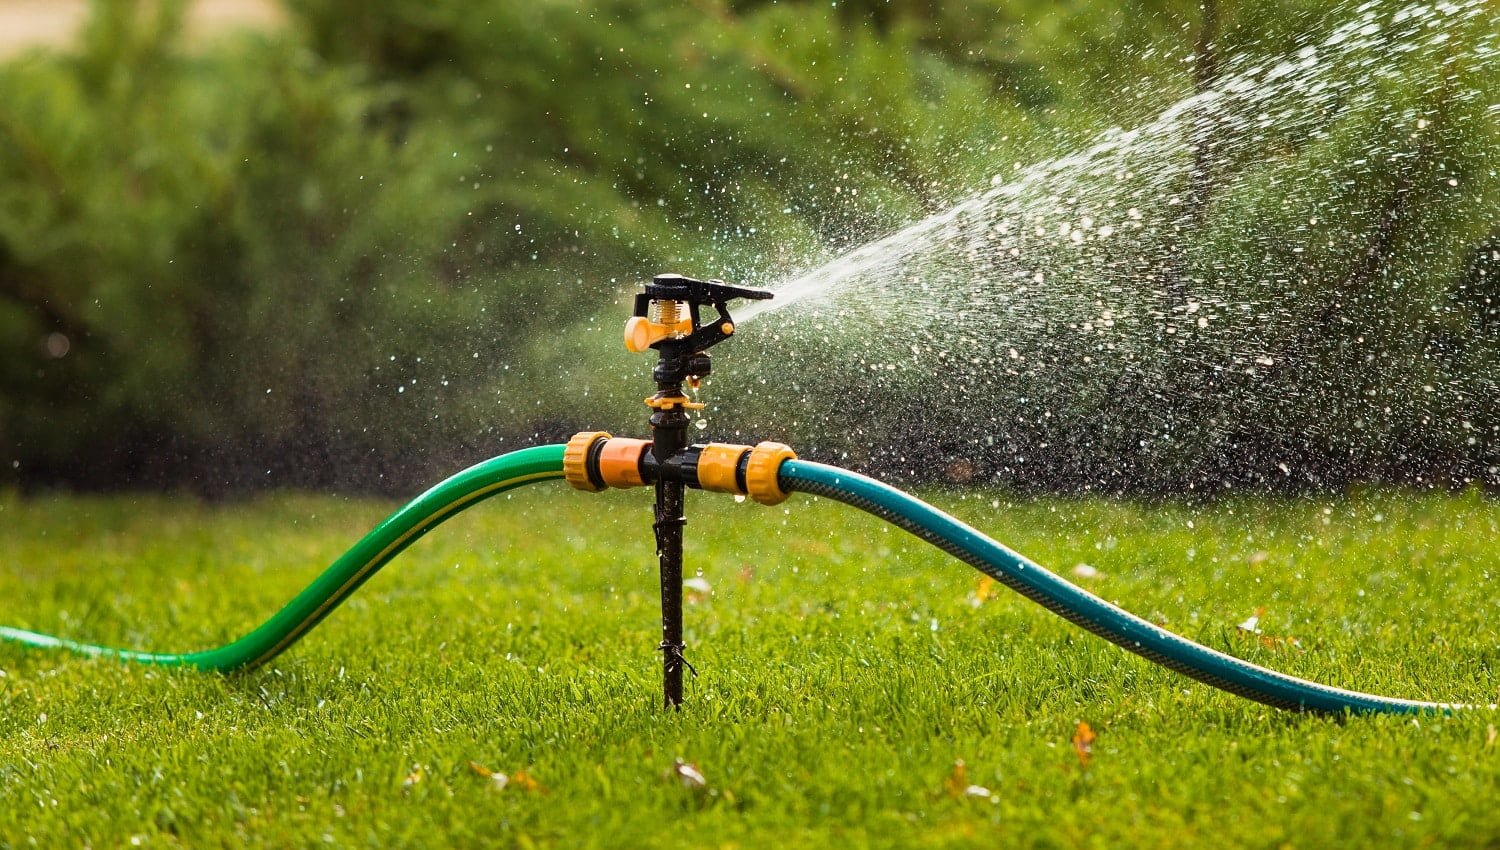 Watering lawn grass in the garden